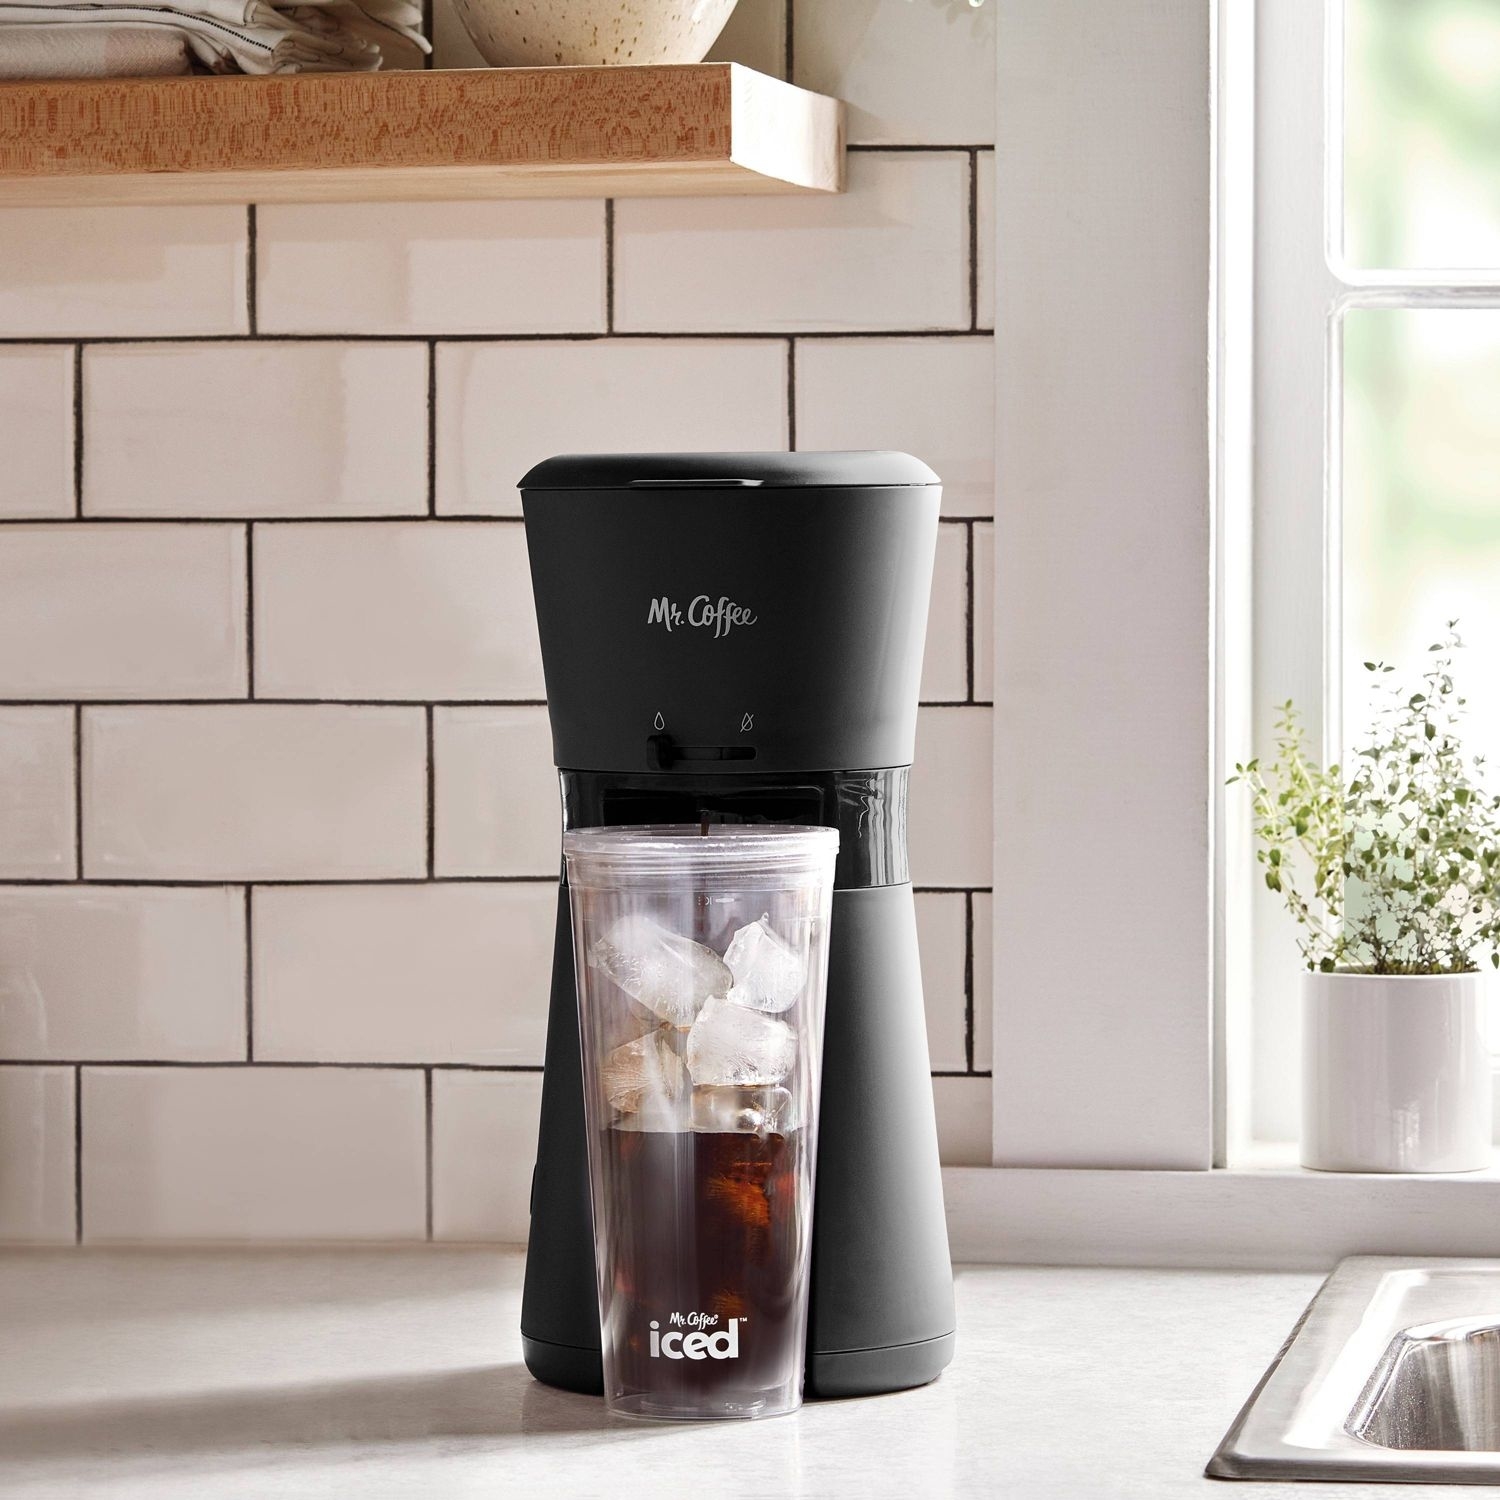 The coffee maker dispensing coffee into a tumbler filled with with ice cubs